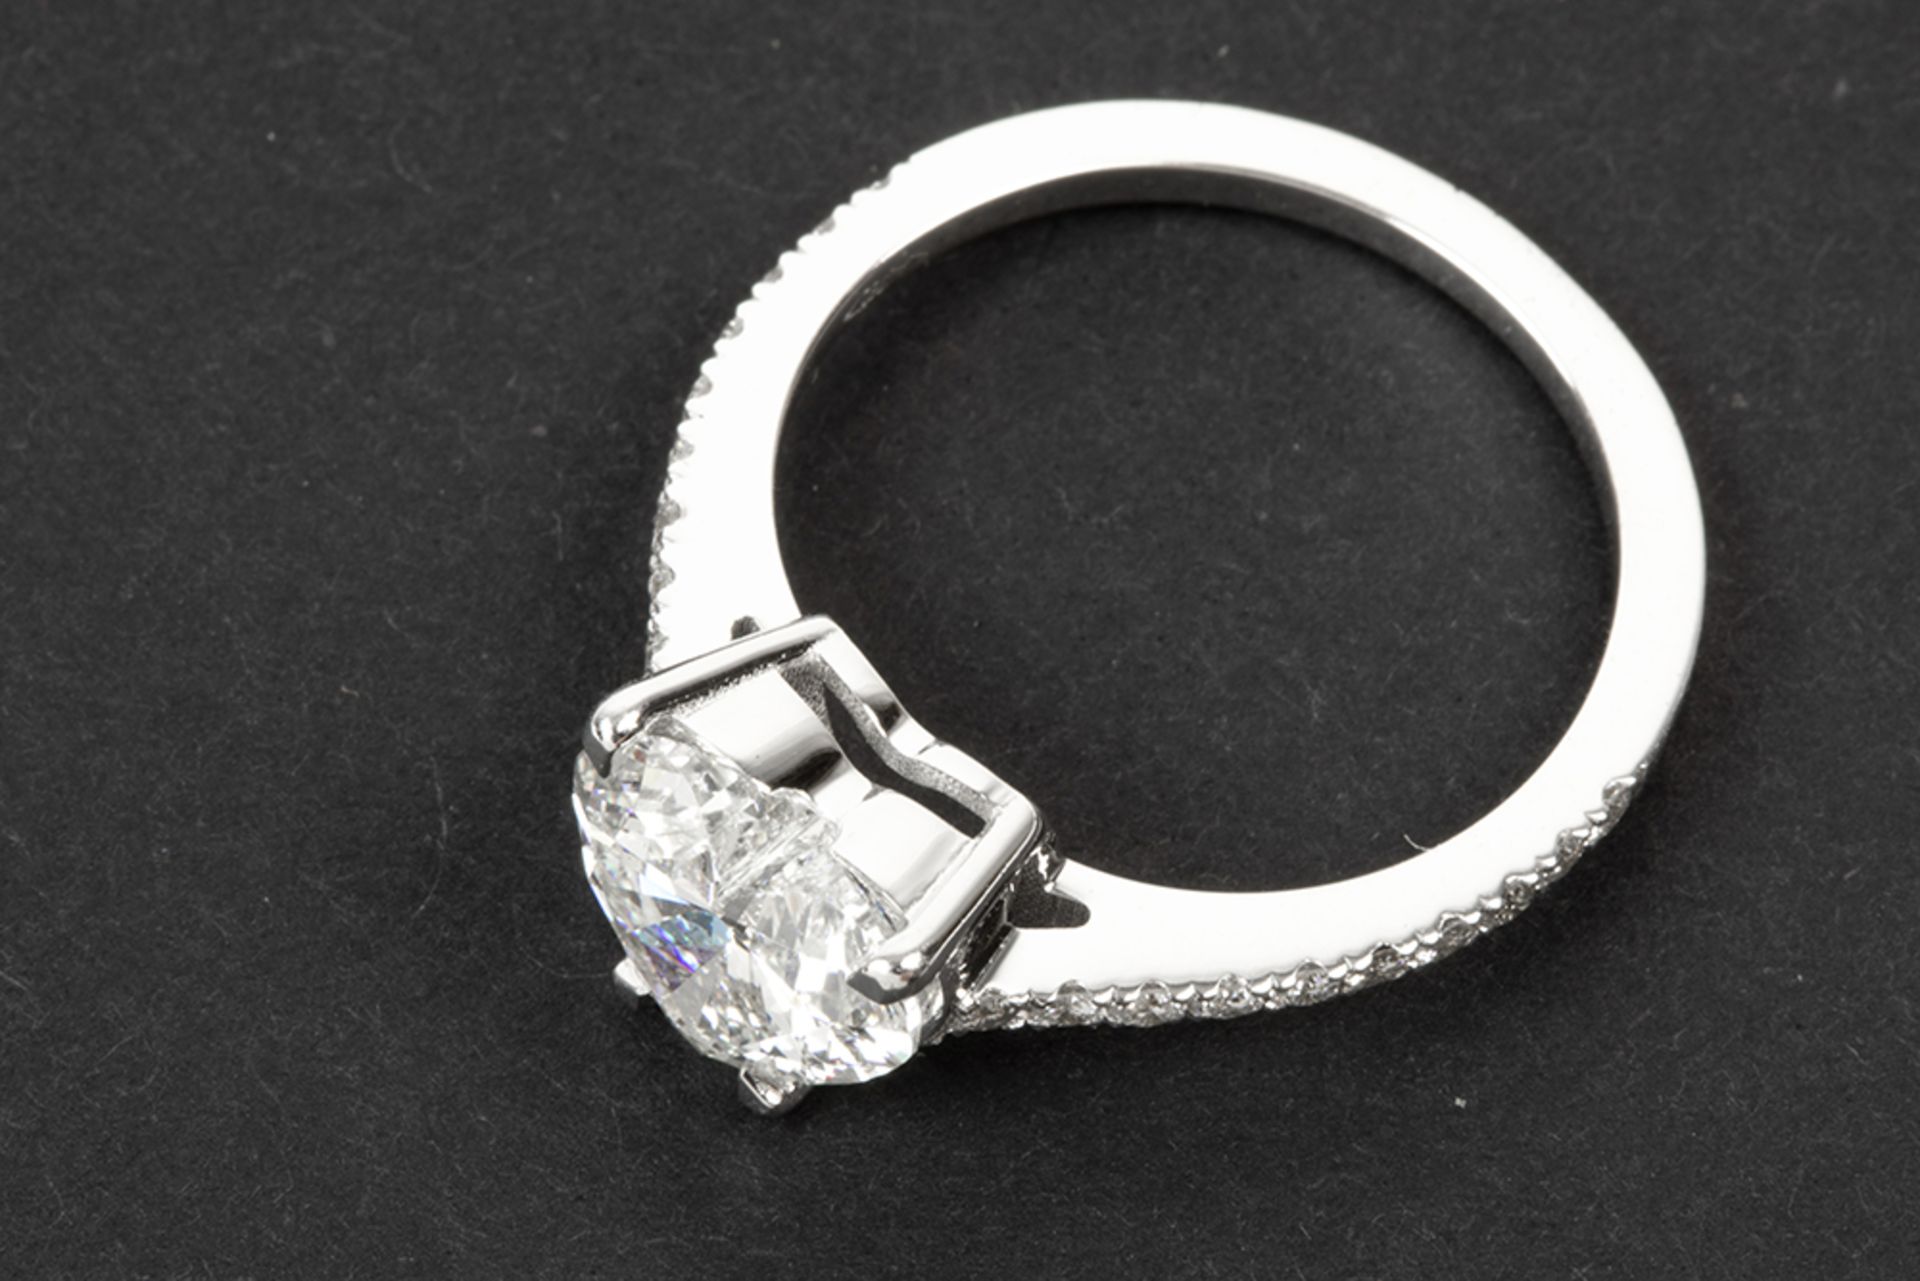 a 2,29 carat quality heartshaped brilliant cut diamond set in a ring in white gold (18 carat) with - Bild 2 aus 3